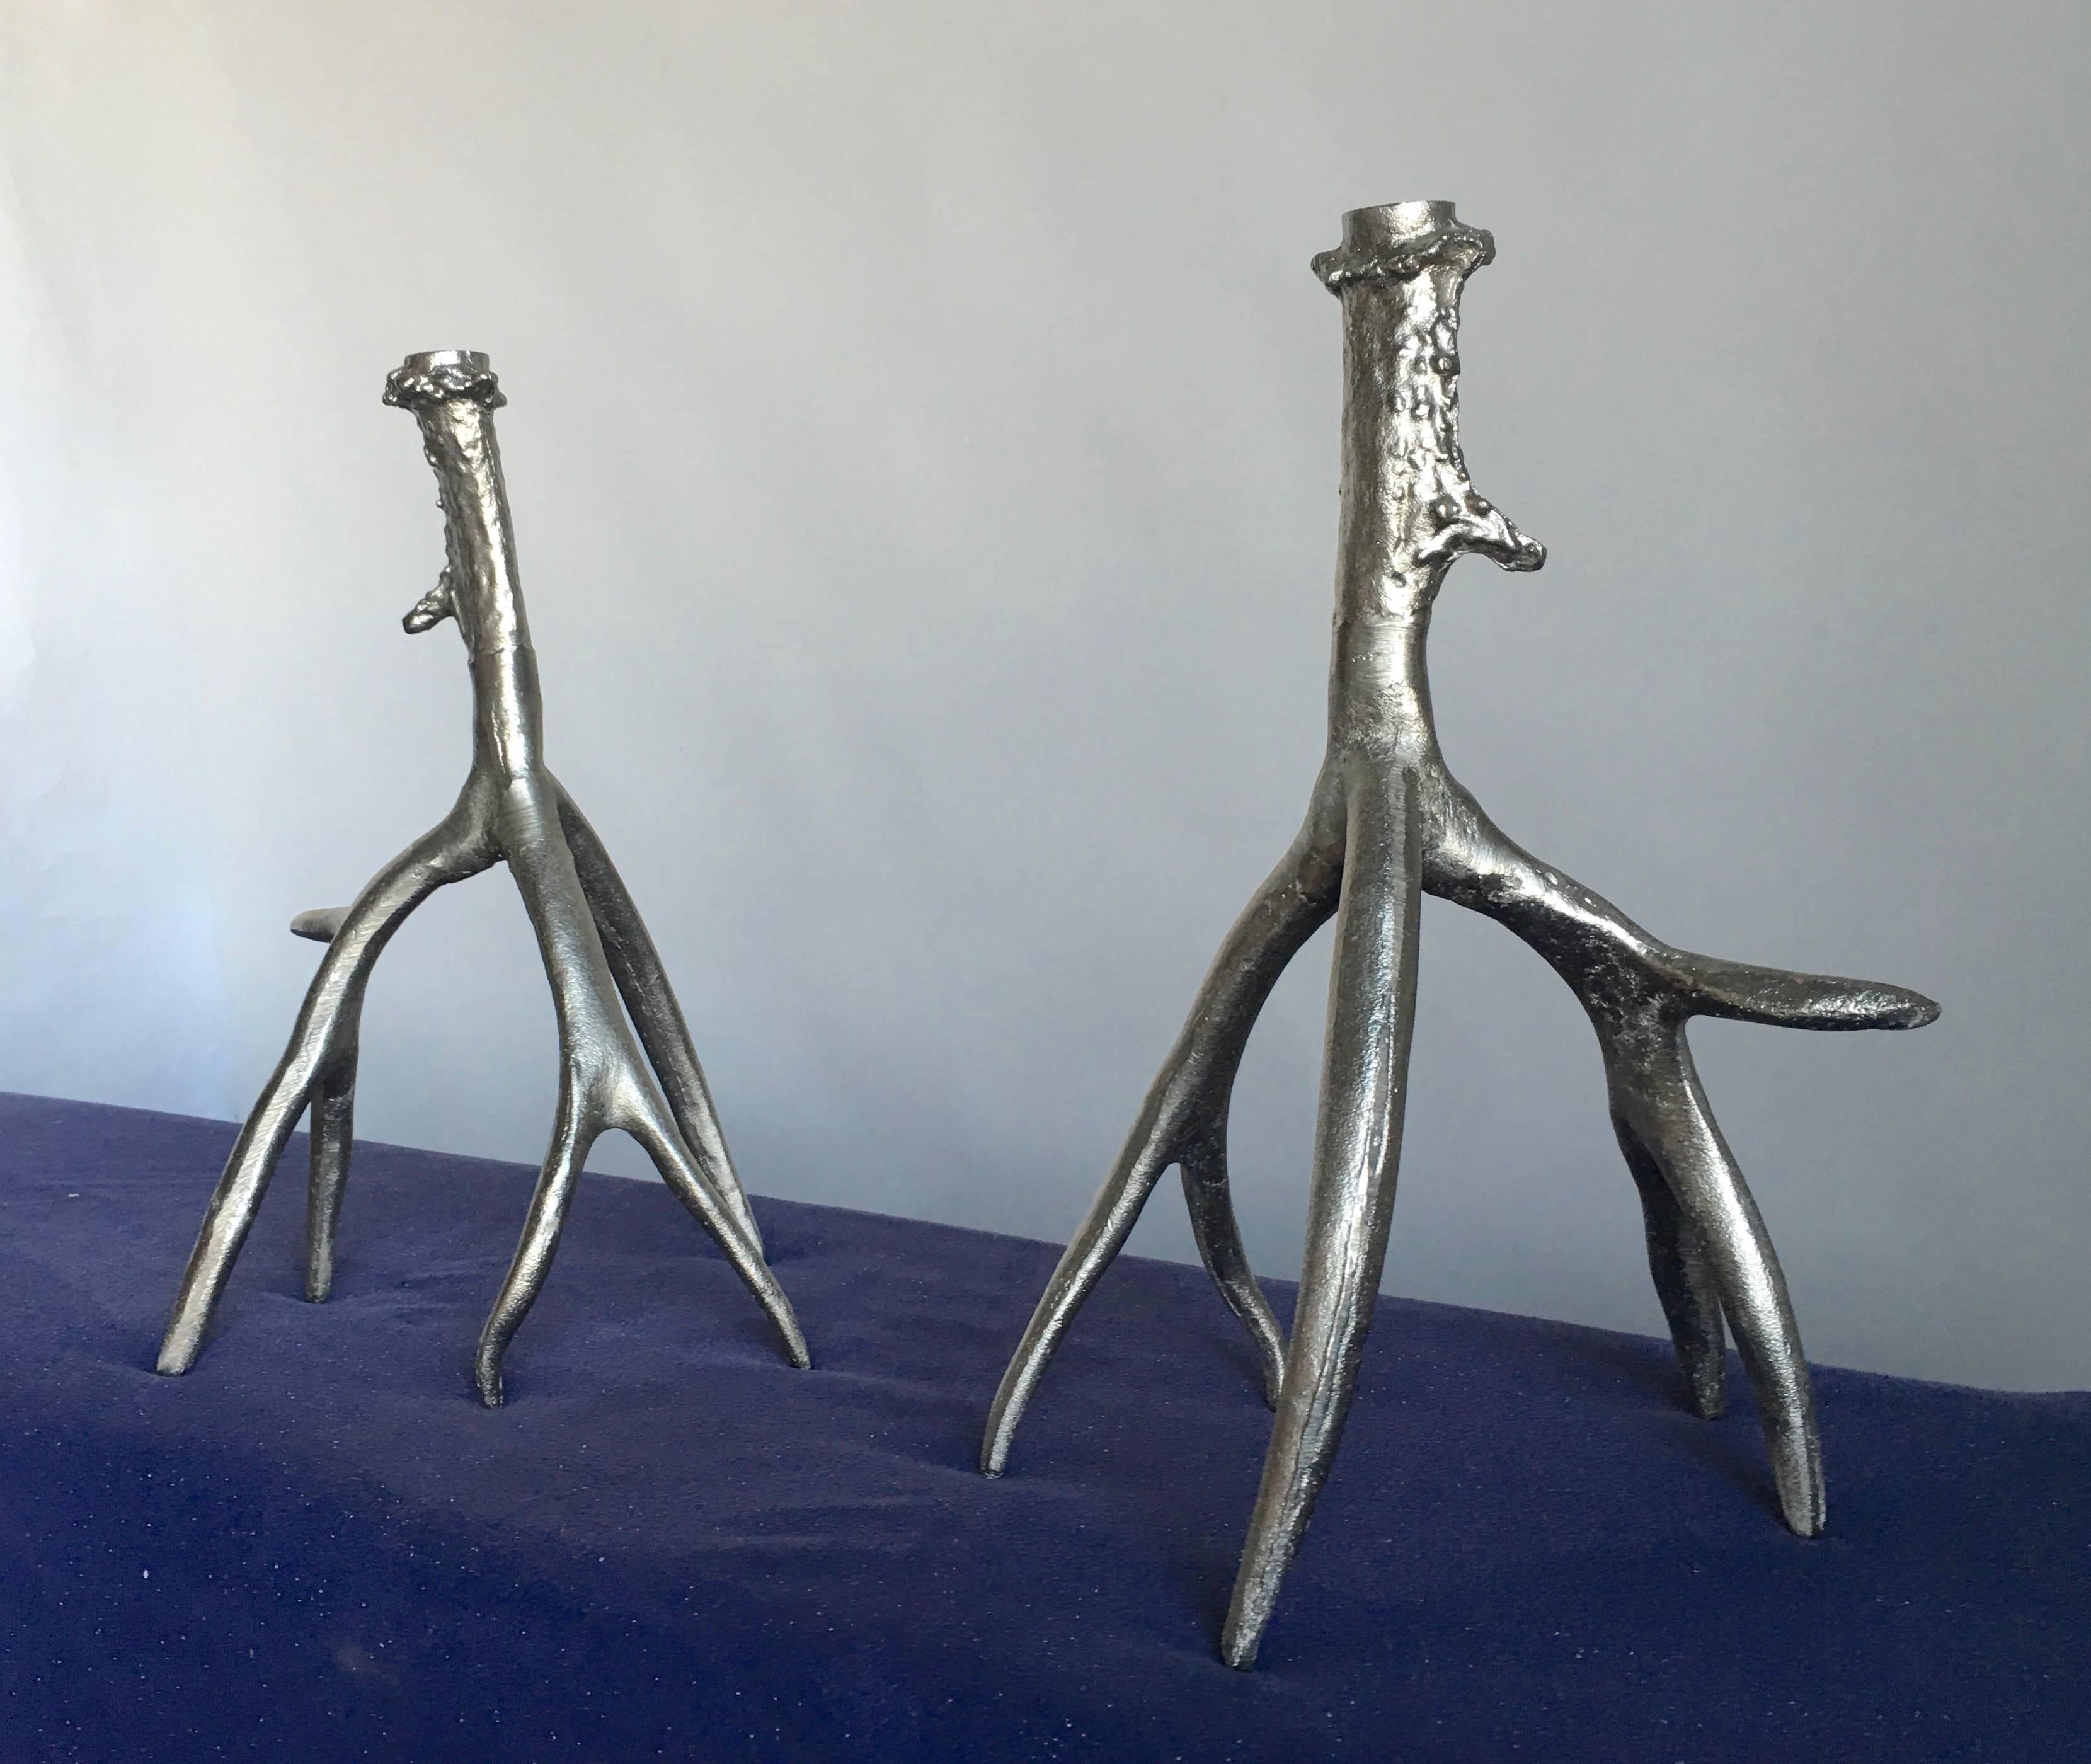 Arthur Court
Pair of Antler Candlesticks
circa 1970s
cast aluminum
Approx 14 inches high x  9 inches in diameter
Excellent condition